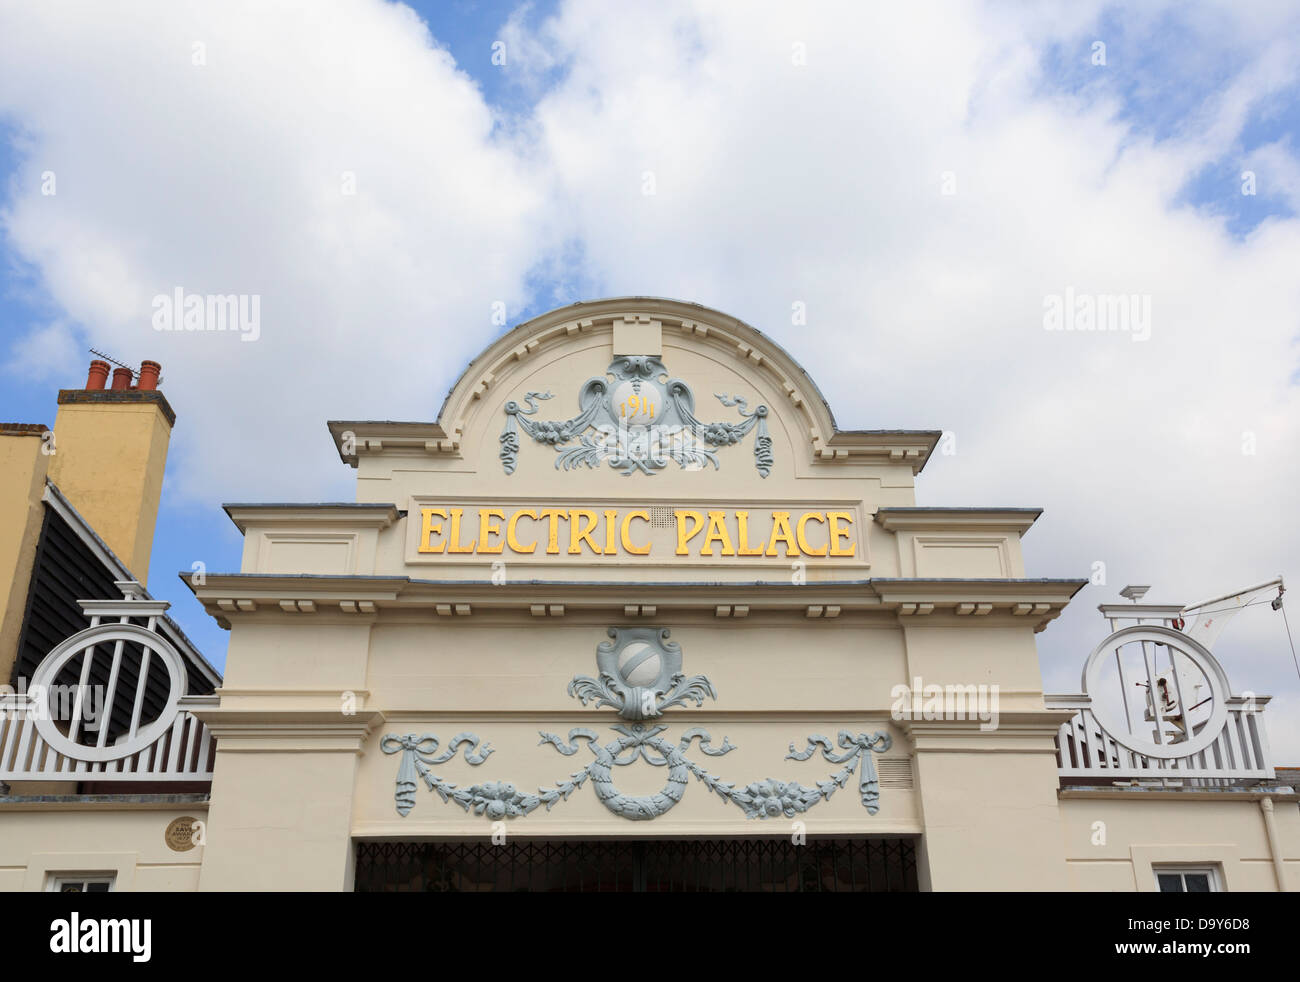 Ornate facade of the Electric Palace cinema in Harwich, Essex, England, UK, Britain Stock Photo